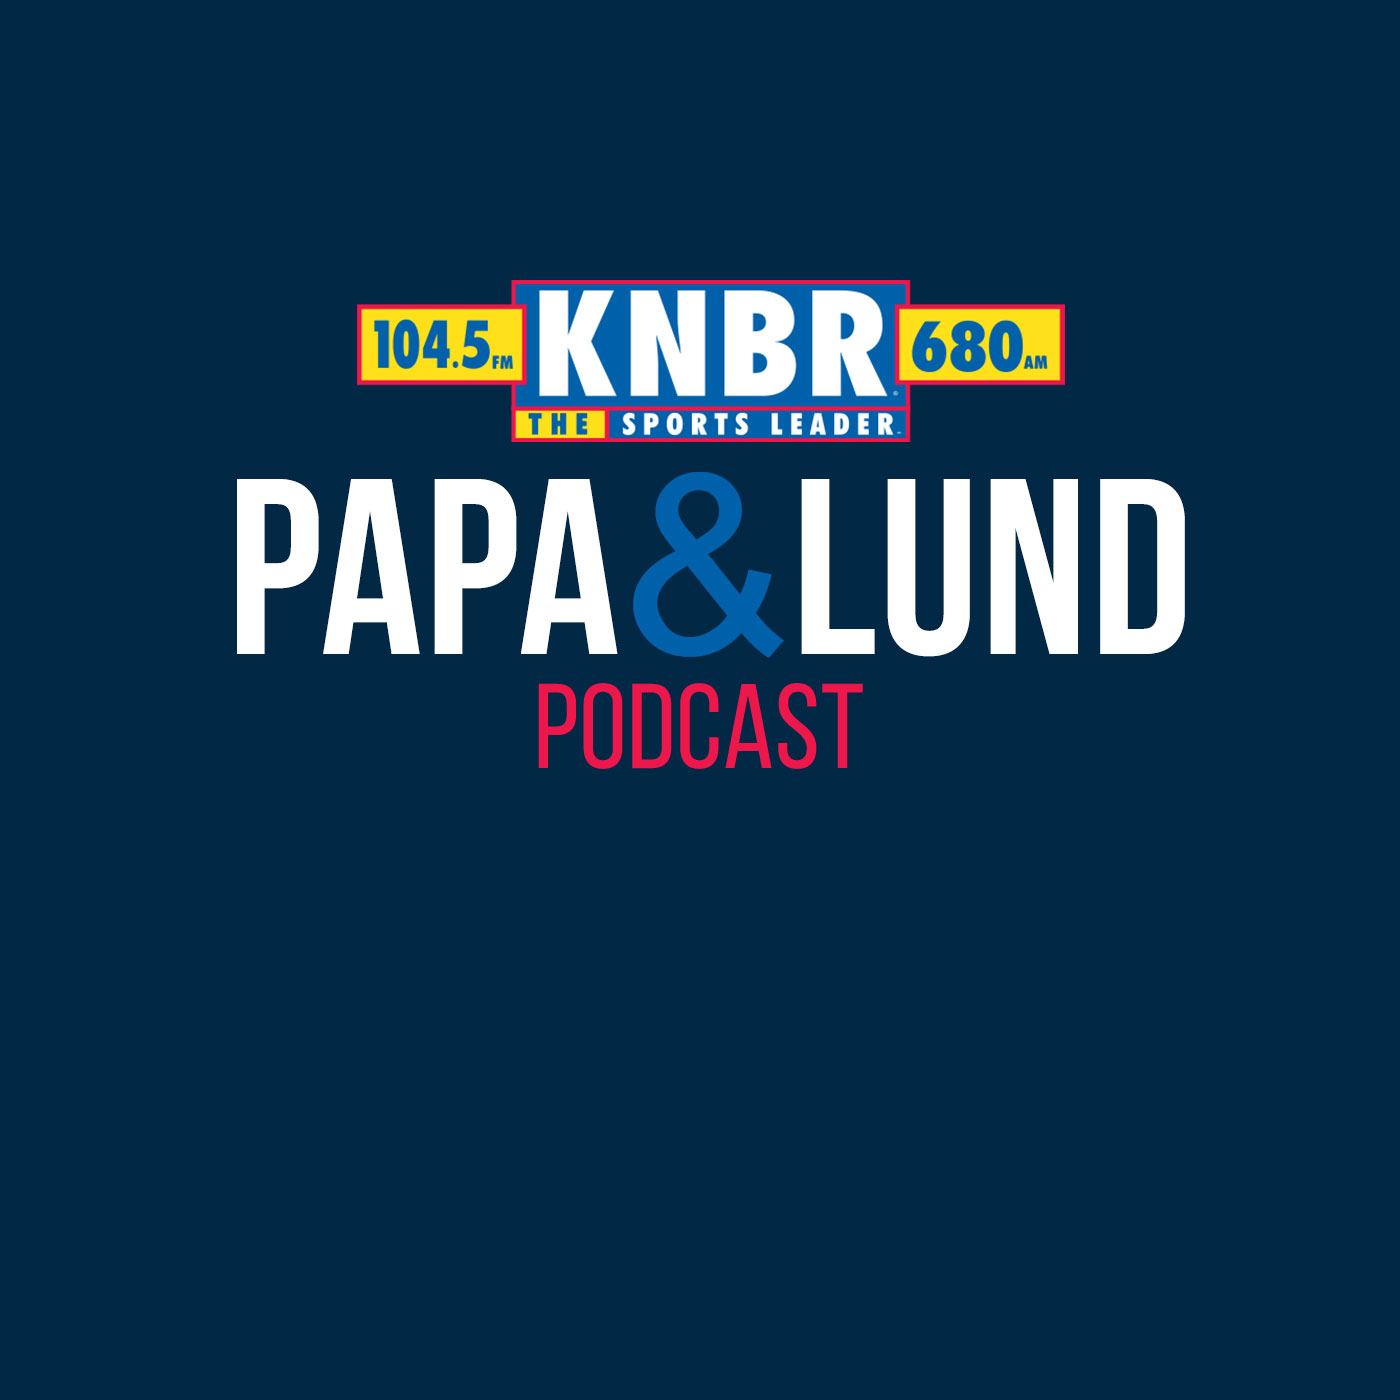 5-17 Andrew Baggarly joins Papa & Lund to discuss Heliot Ramos hot start and if he has a place of the team once everyone gets healthy